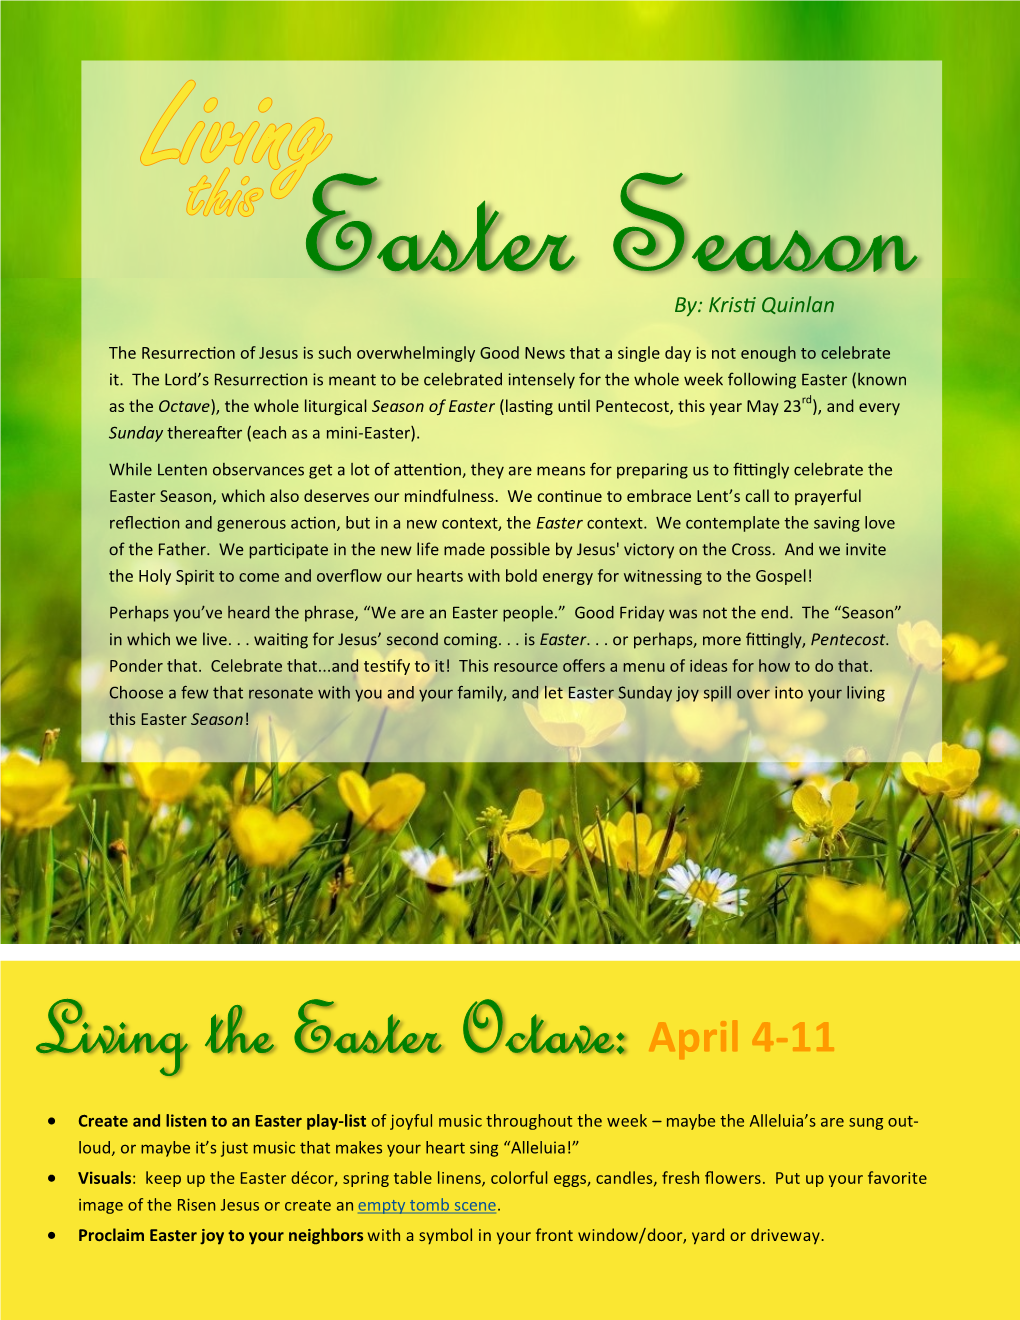 Living the Easter Octave: April 4-11